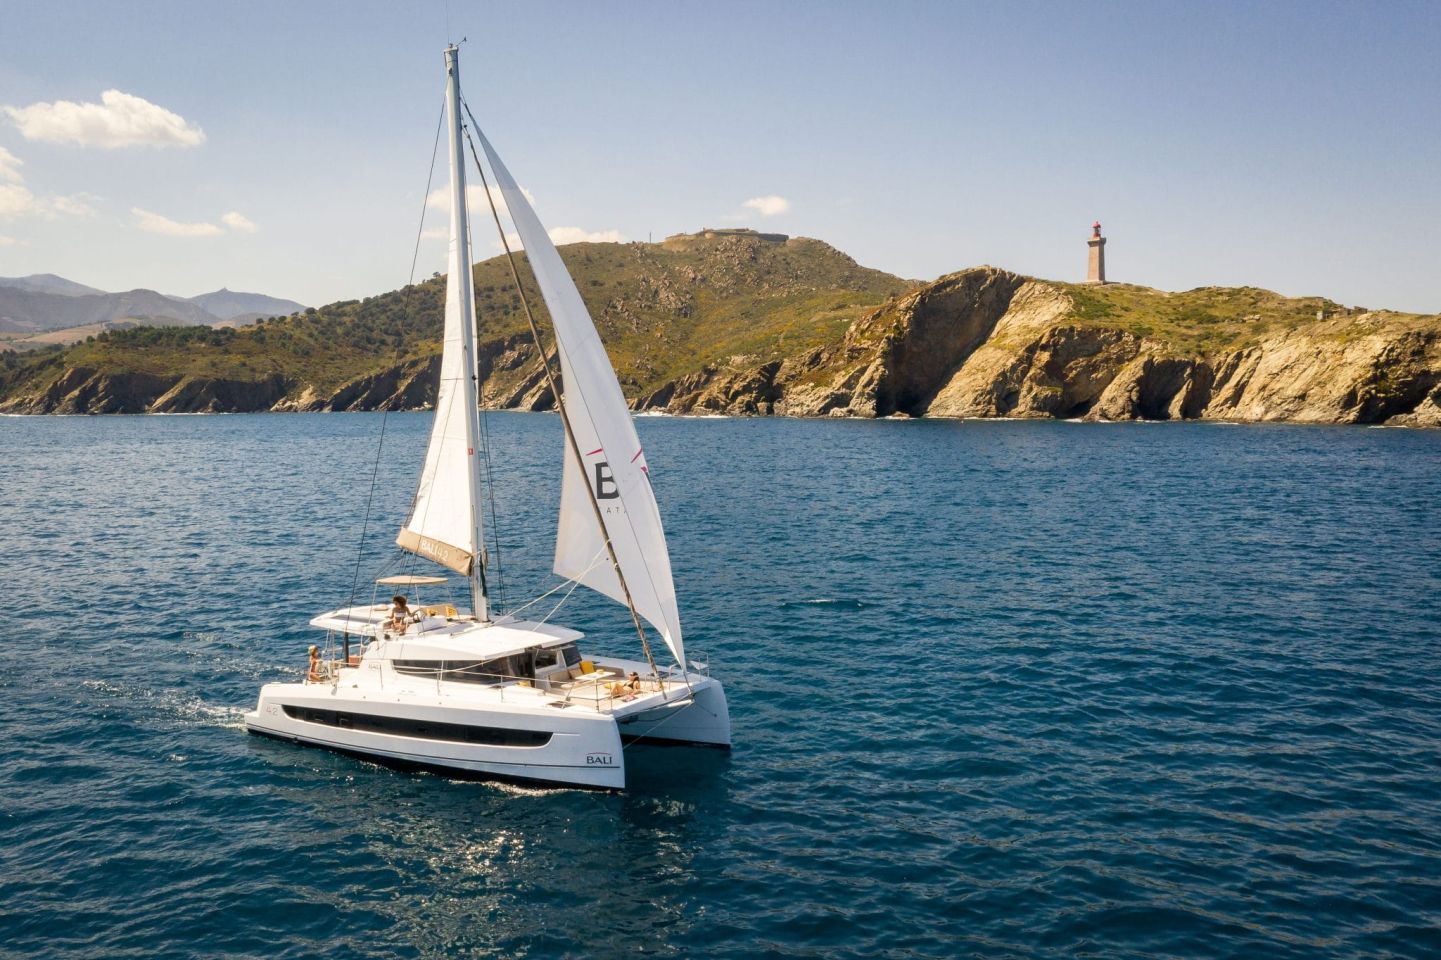 Bali 4.2 OW - Yacht Charter Caribbean & Boat hire in US Virgin Islands St. Thomas East End Compass Point Marina 1